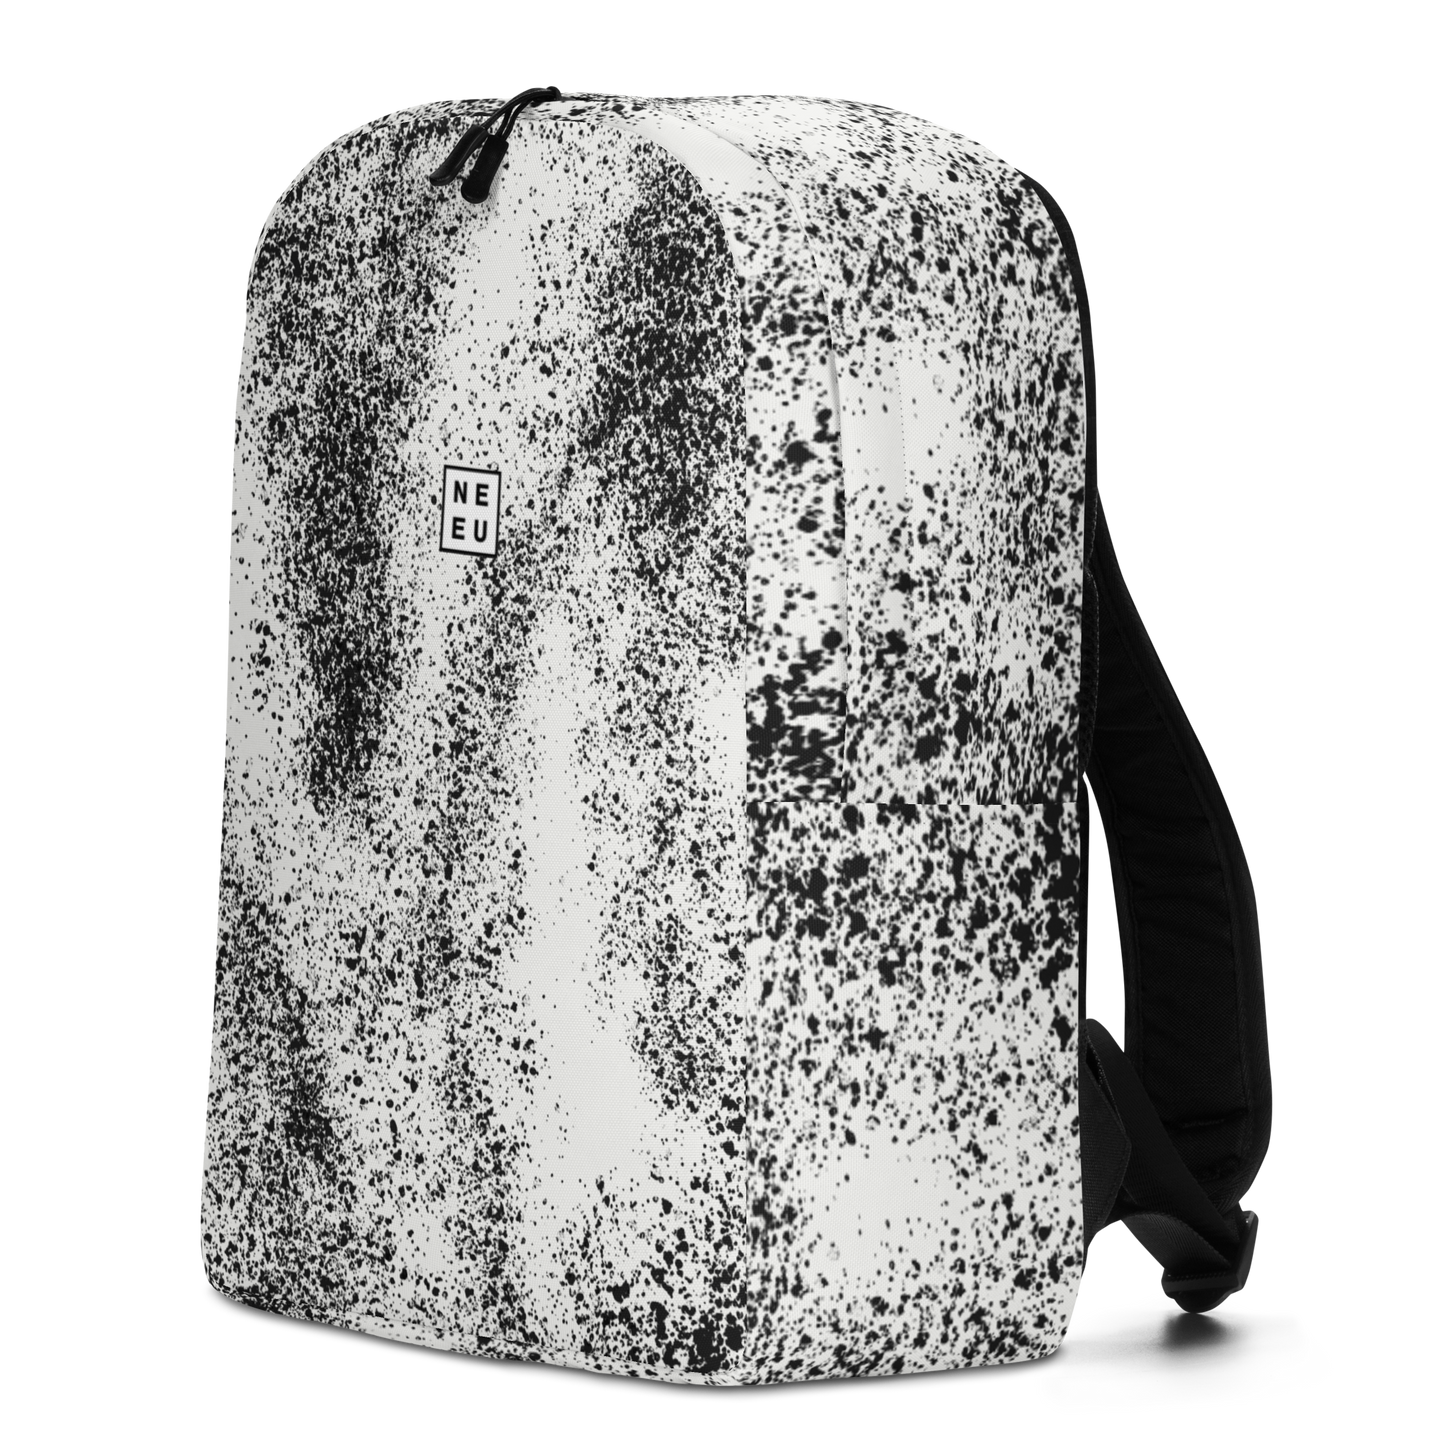 Neue City Adventure Backpack in black and white speckle pattern 3/4 view